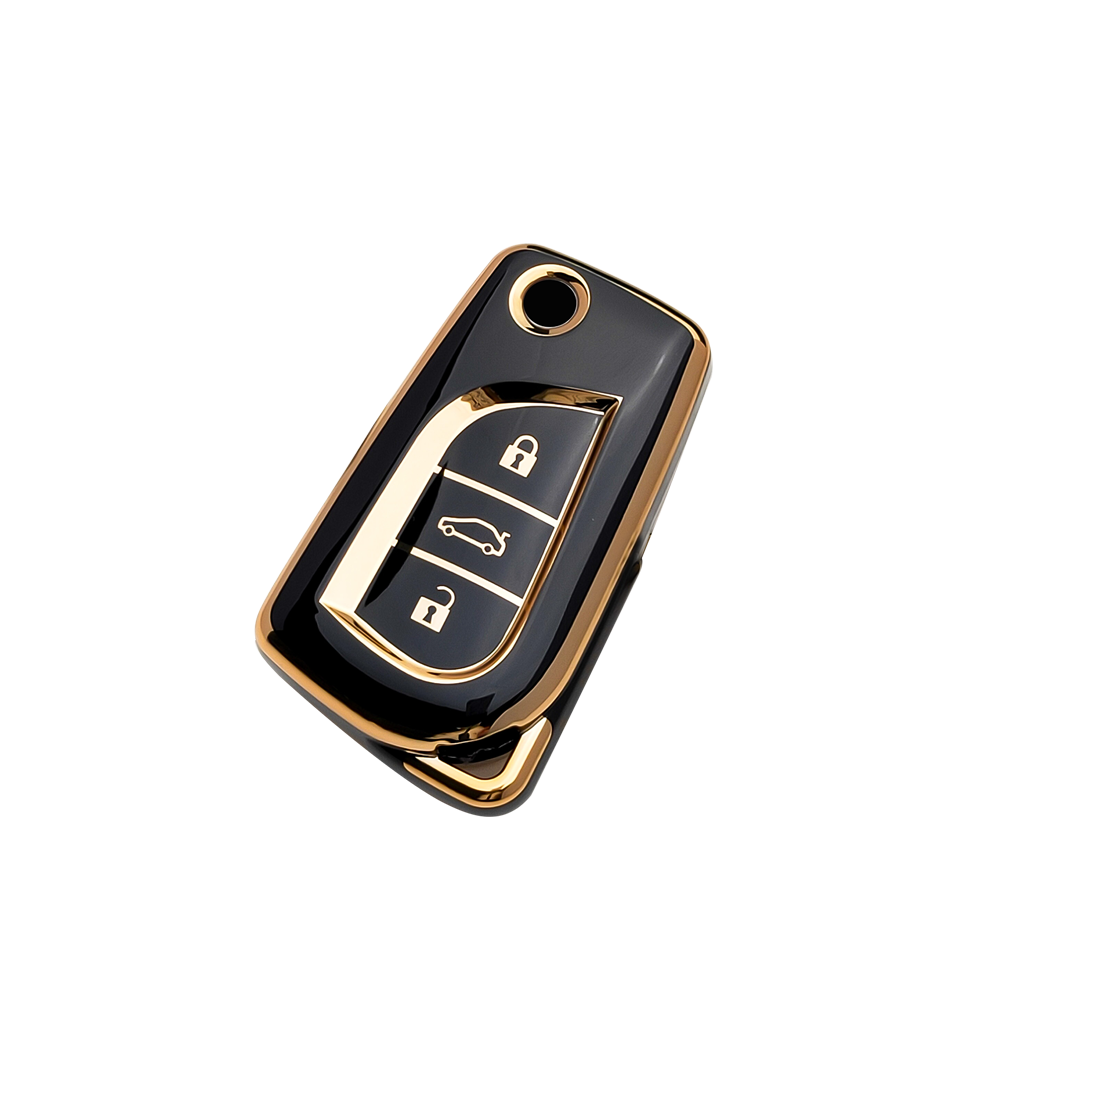 Acto TPU Gold Series Car Key Cover With Diamond Key Ring For Toyota Crysta